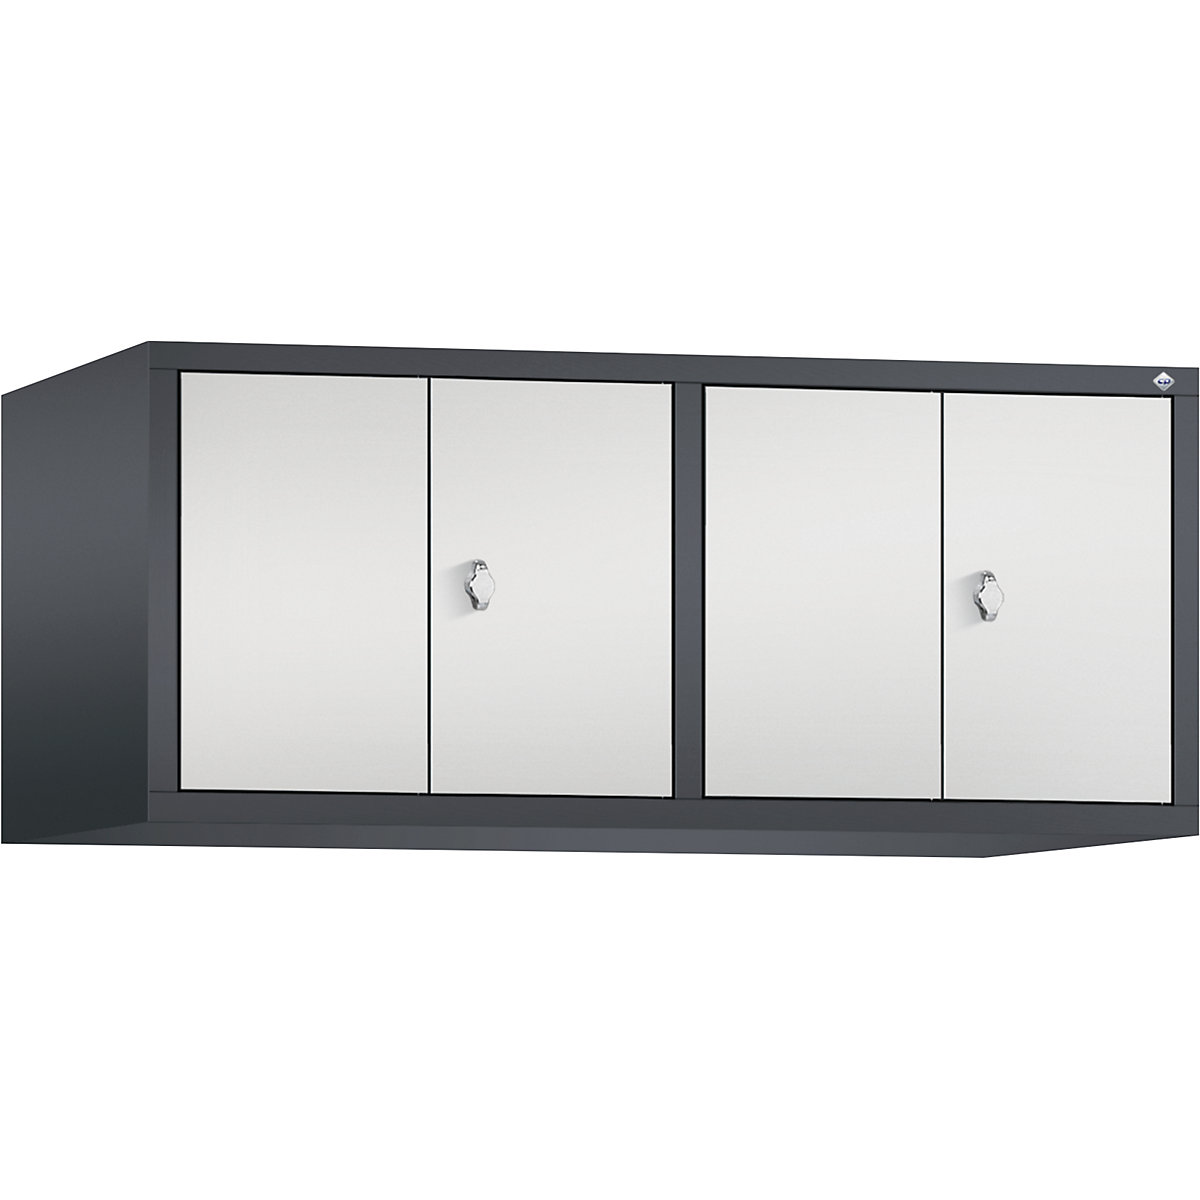 CLASSIC add-on cupboard, doors close in the middle – C+P